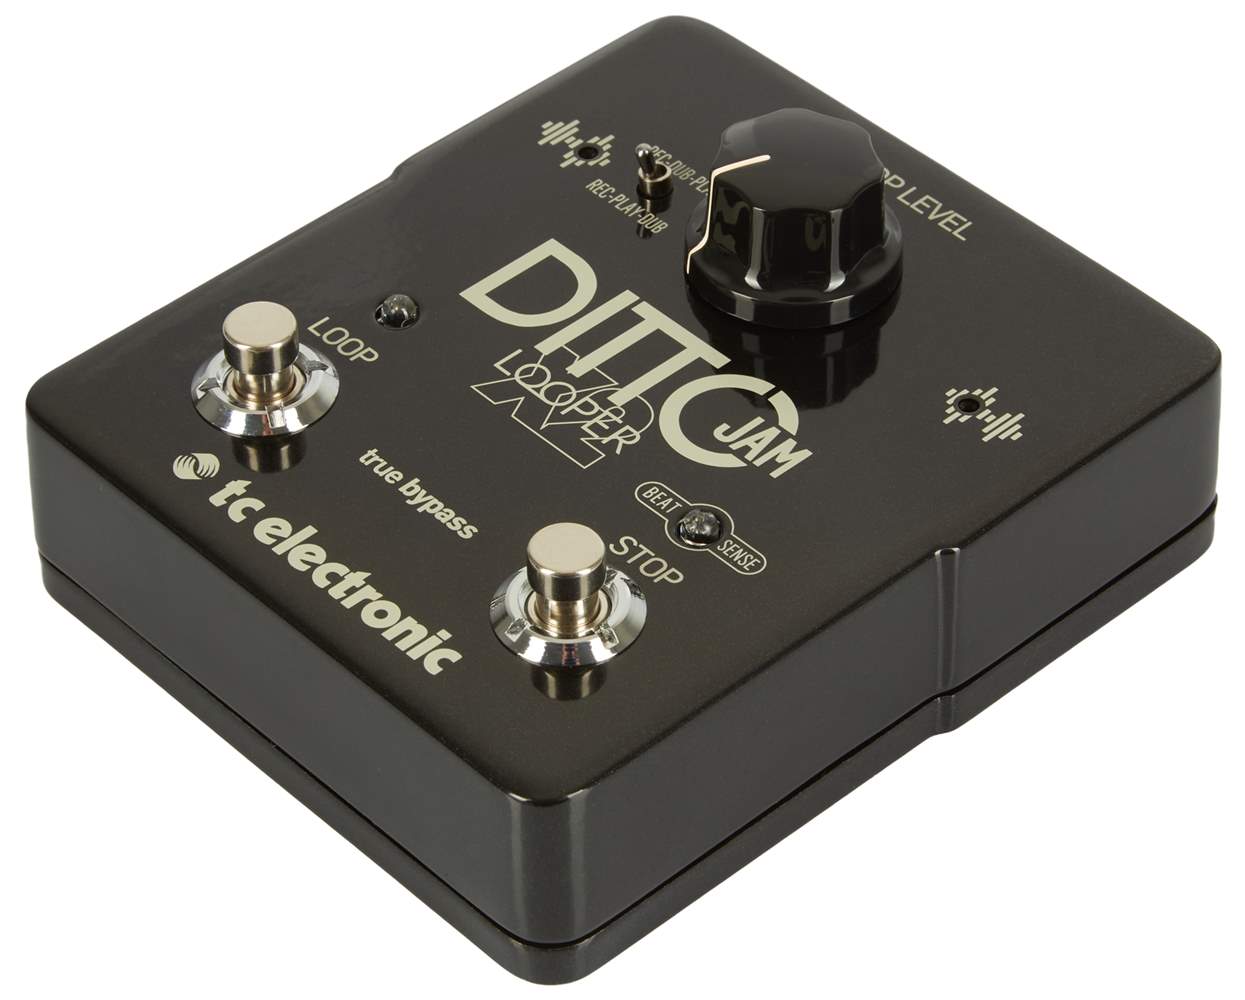 TC ELECTRONIC Ditto Jam X2 Looper Guitar Looper | Kytary.ie